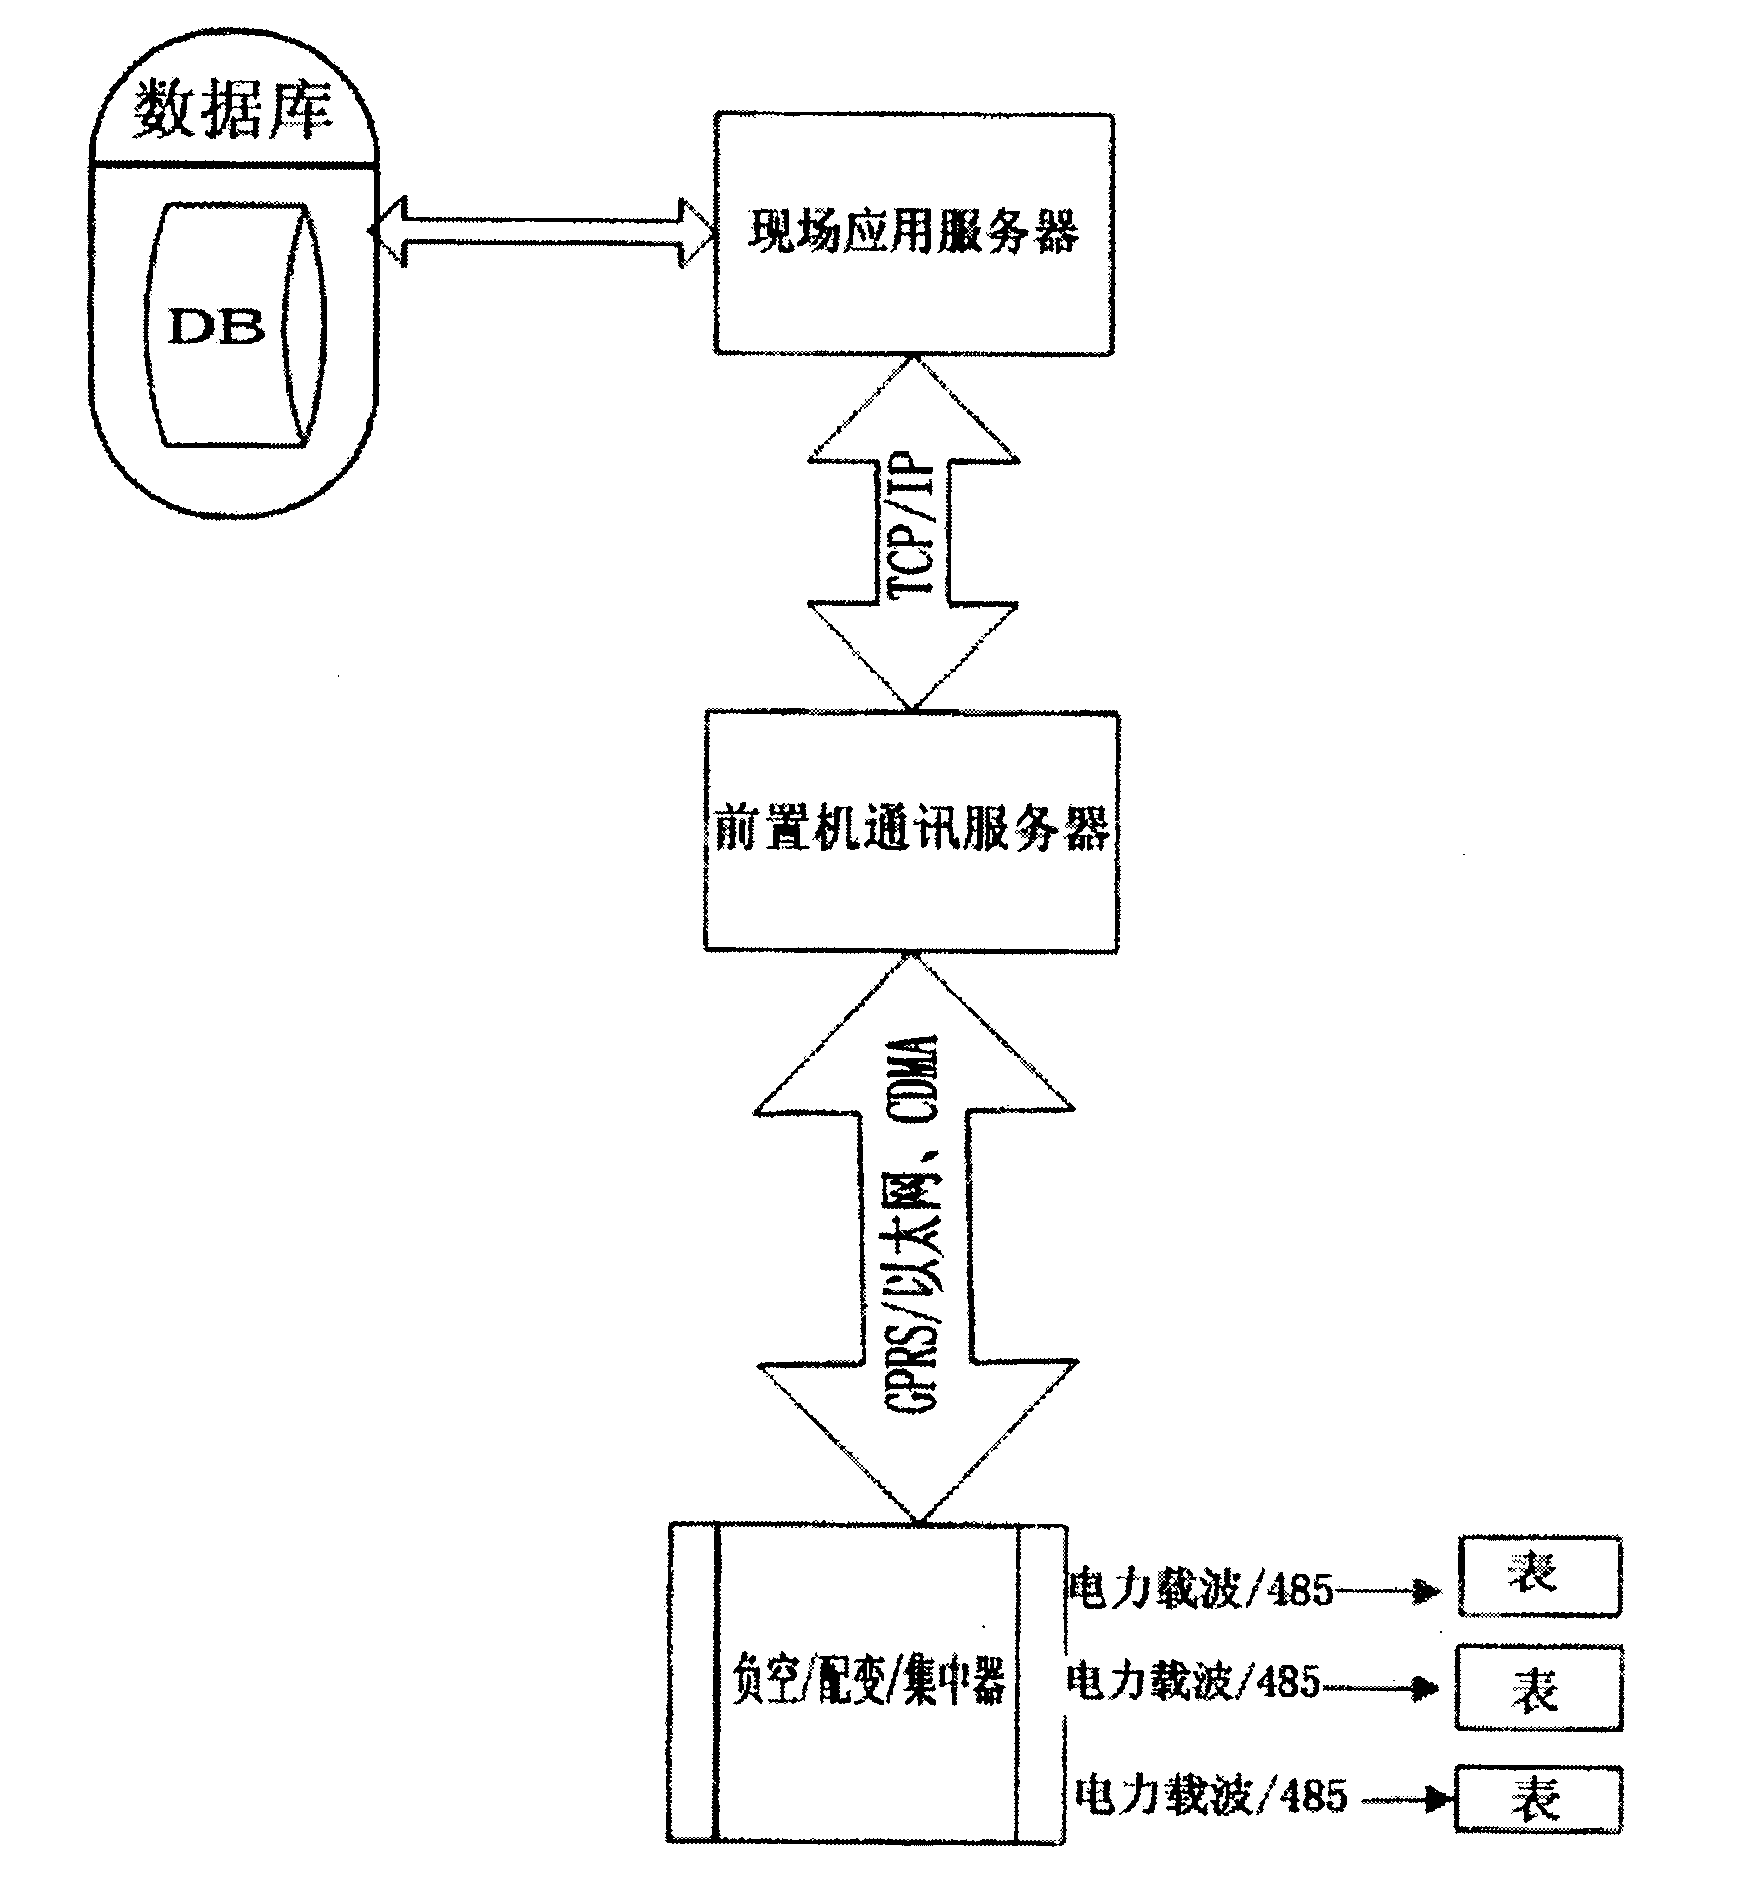 Method for automatically detecting terminals in batch based on IEC62056 protocol